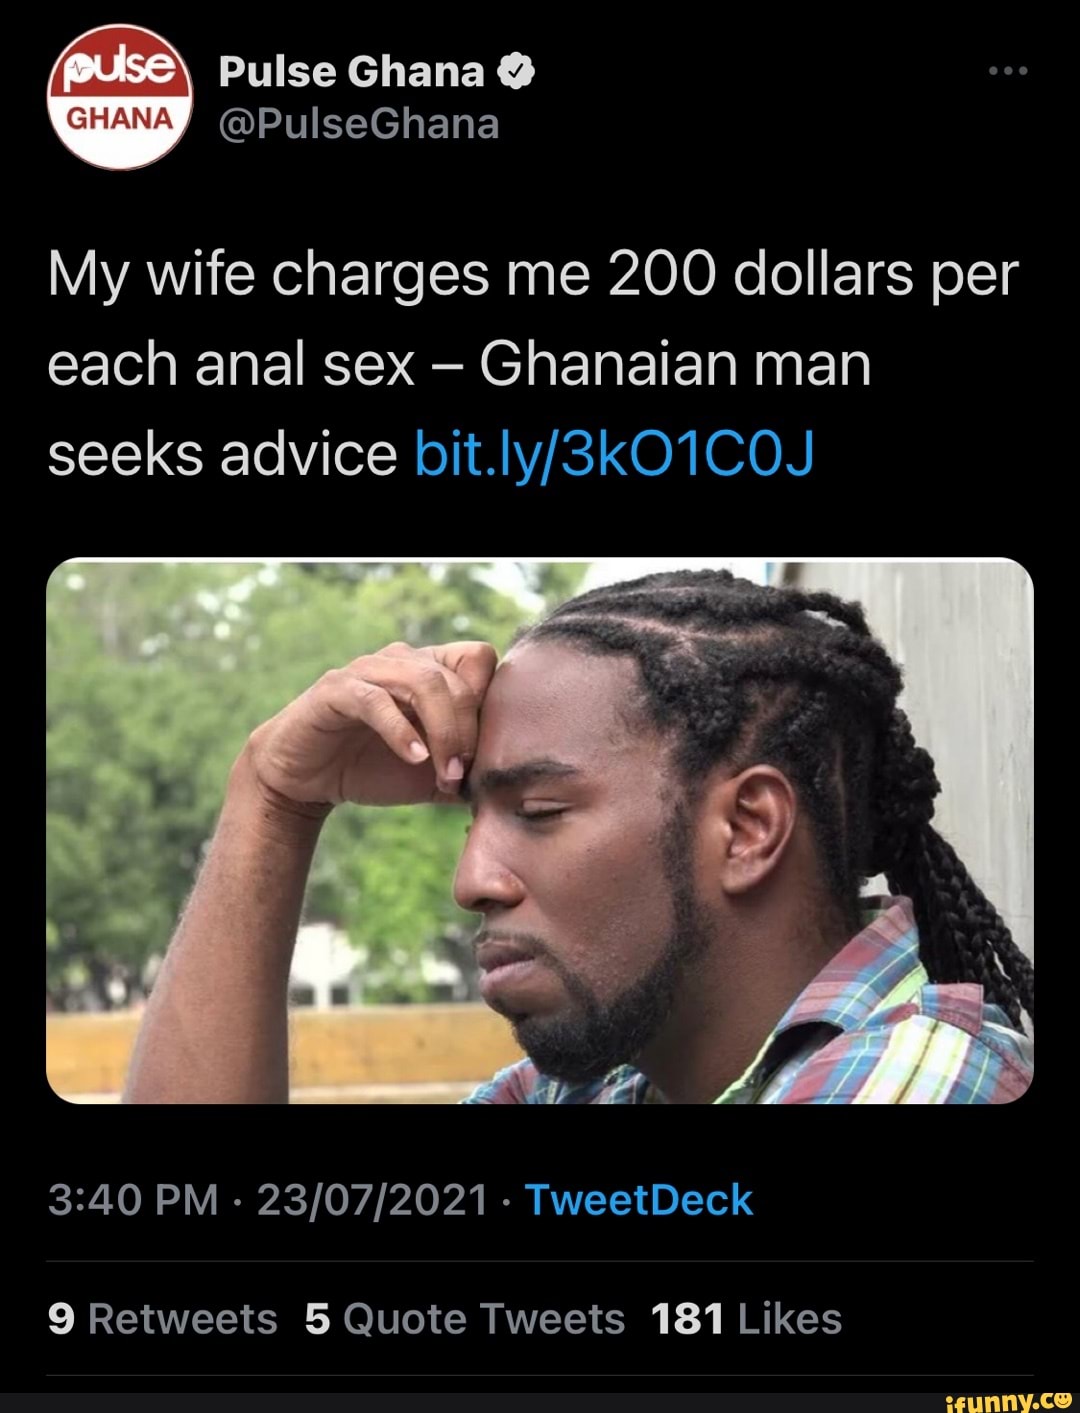 My wife charges me 200 dollars per each anal sex Ghanaian man seeks advice PM - - TweetDeck picture image